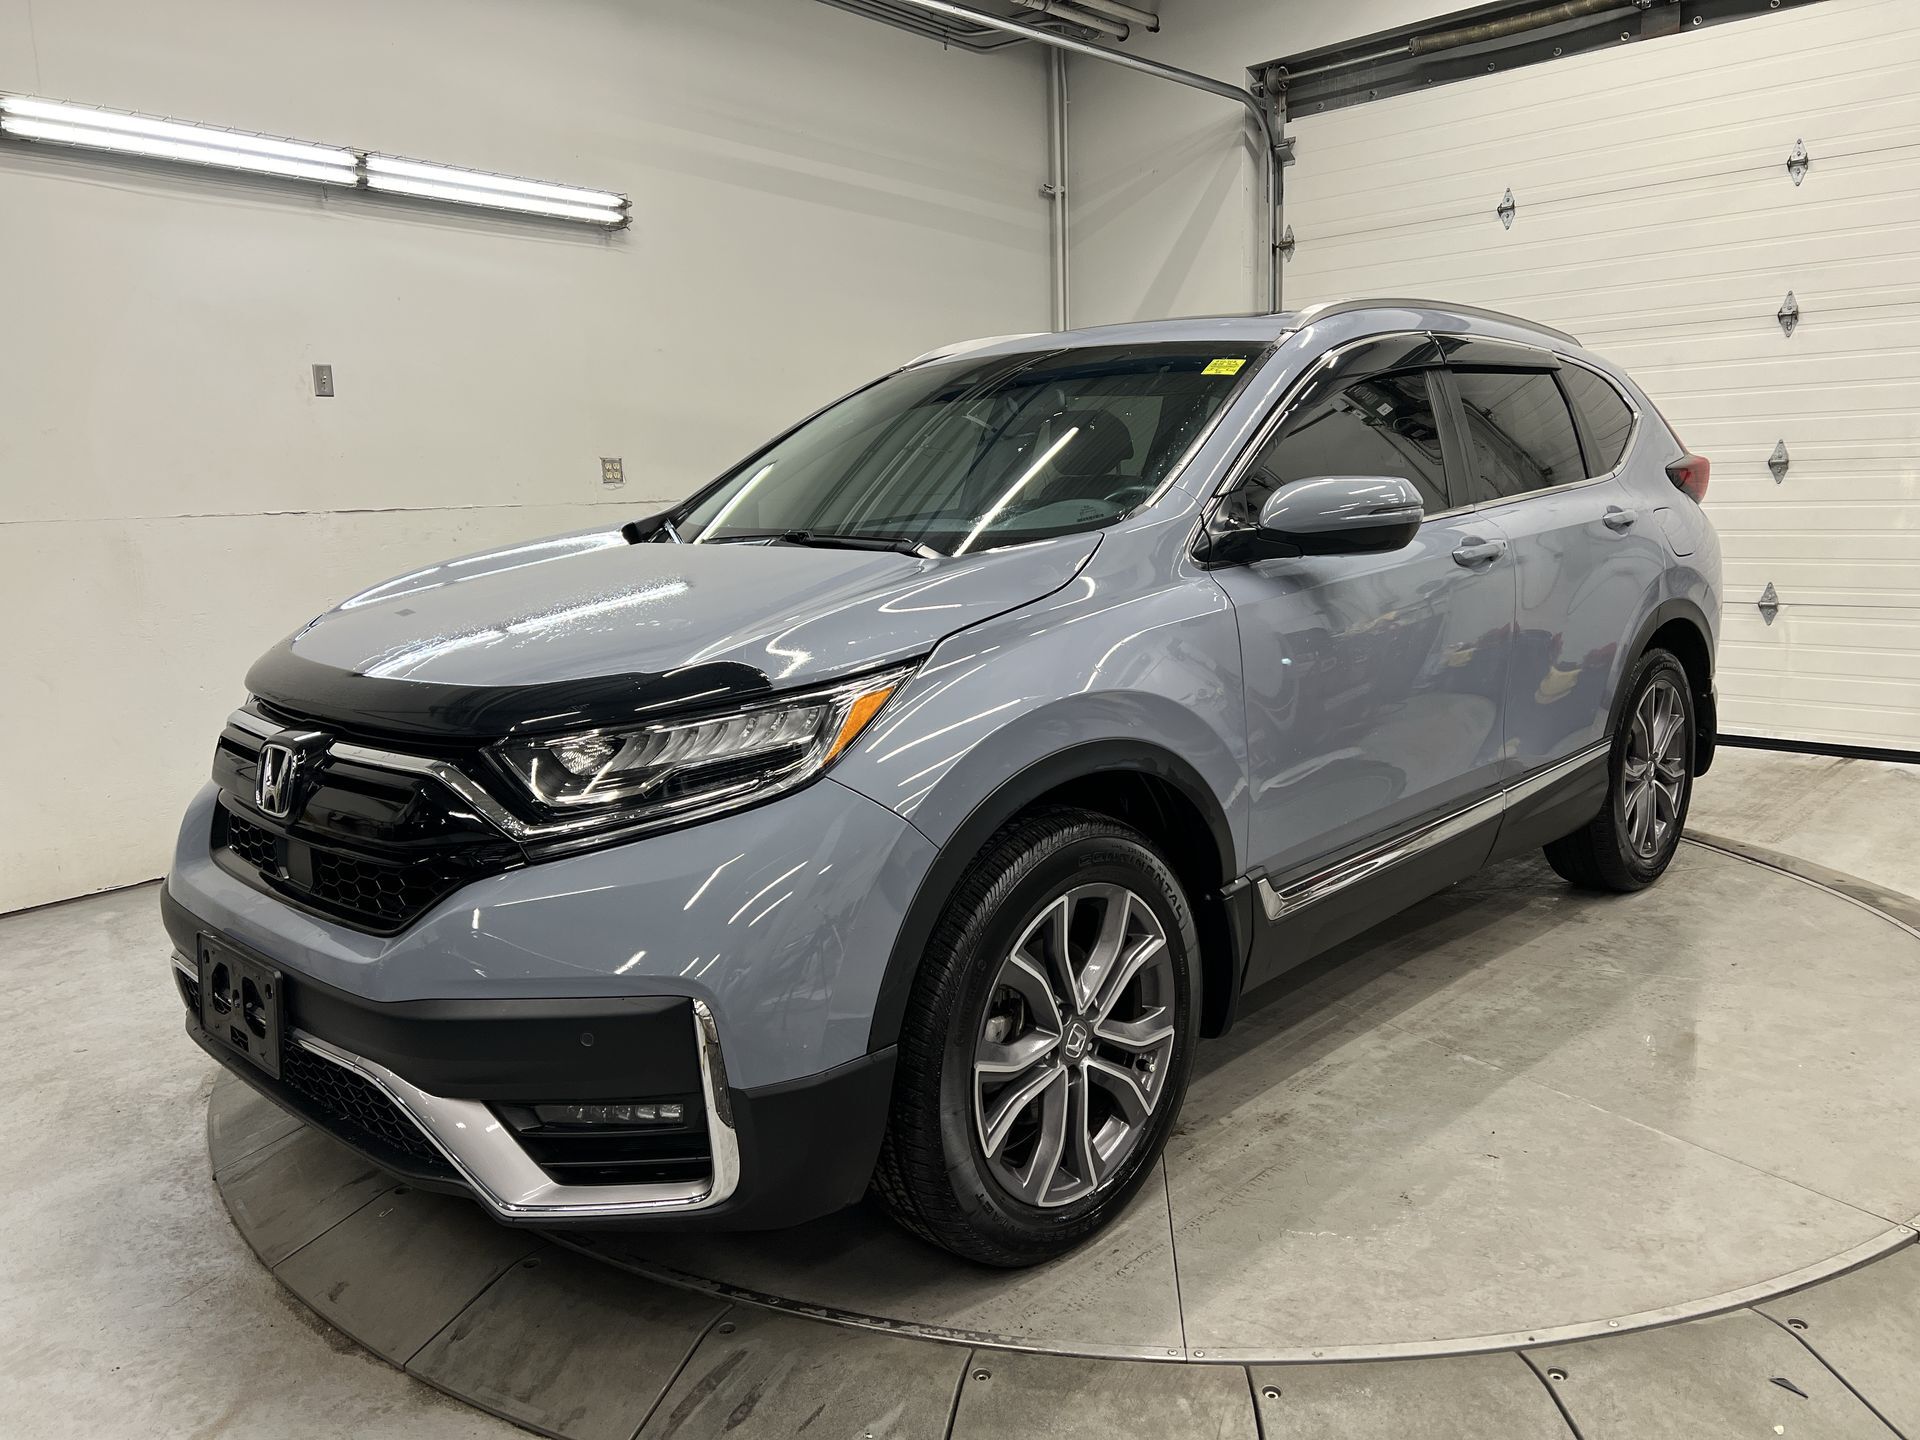 2020 Honda CR-V TOURING AWD | PANO ROOF | LEATHER | NAV | LOW KMS!